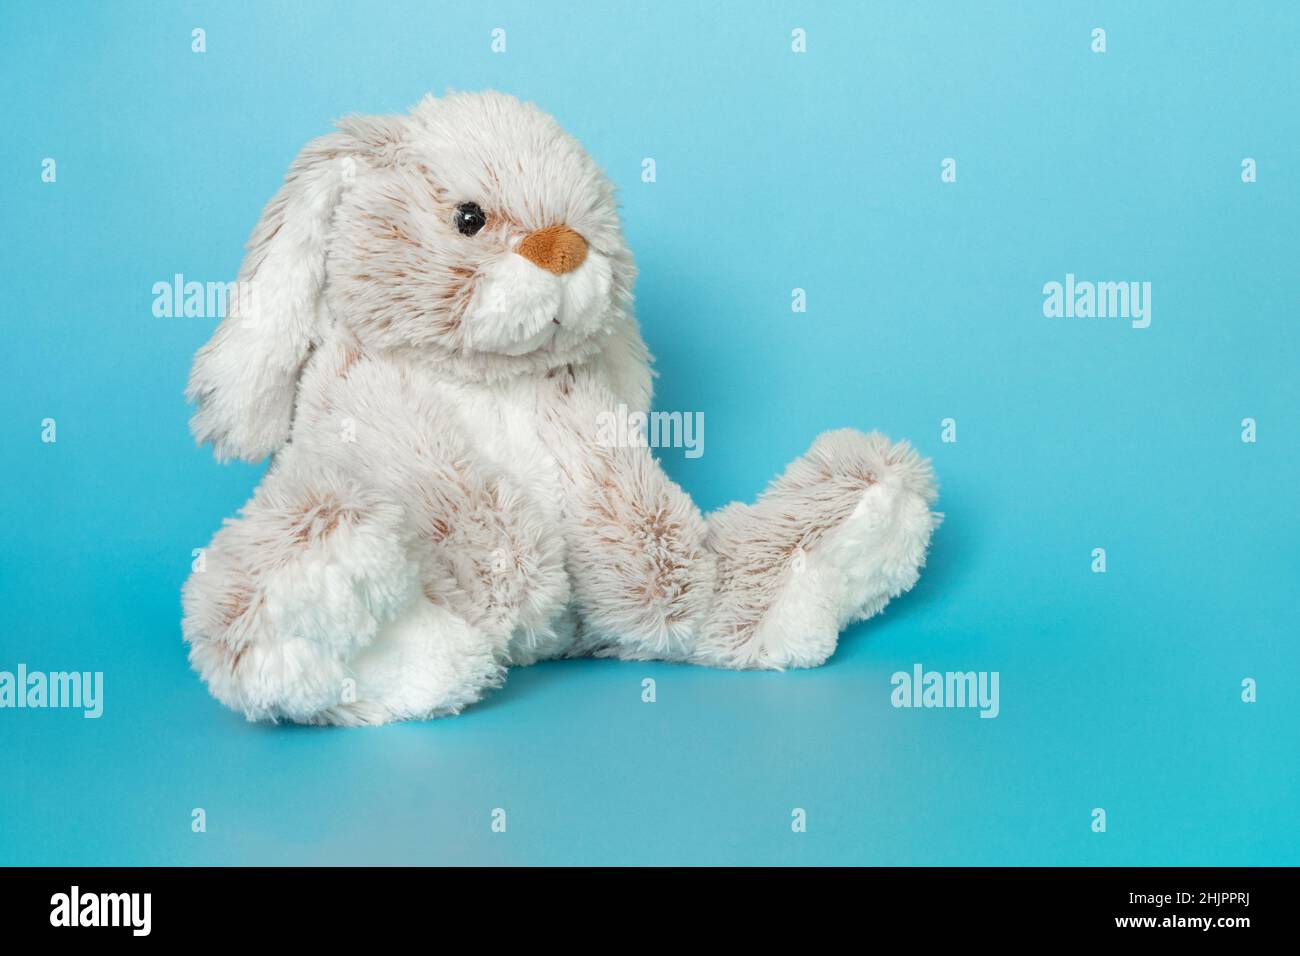 Stuffed bunny on blue background. Easter concept. Cute white toy bunny sitting on colored background. Stock Photo